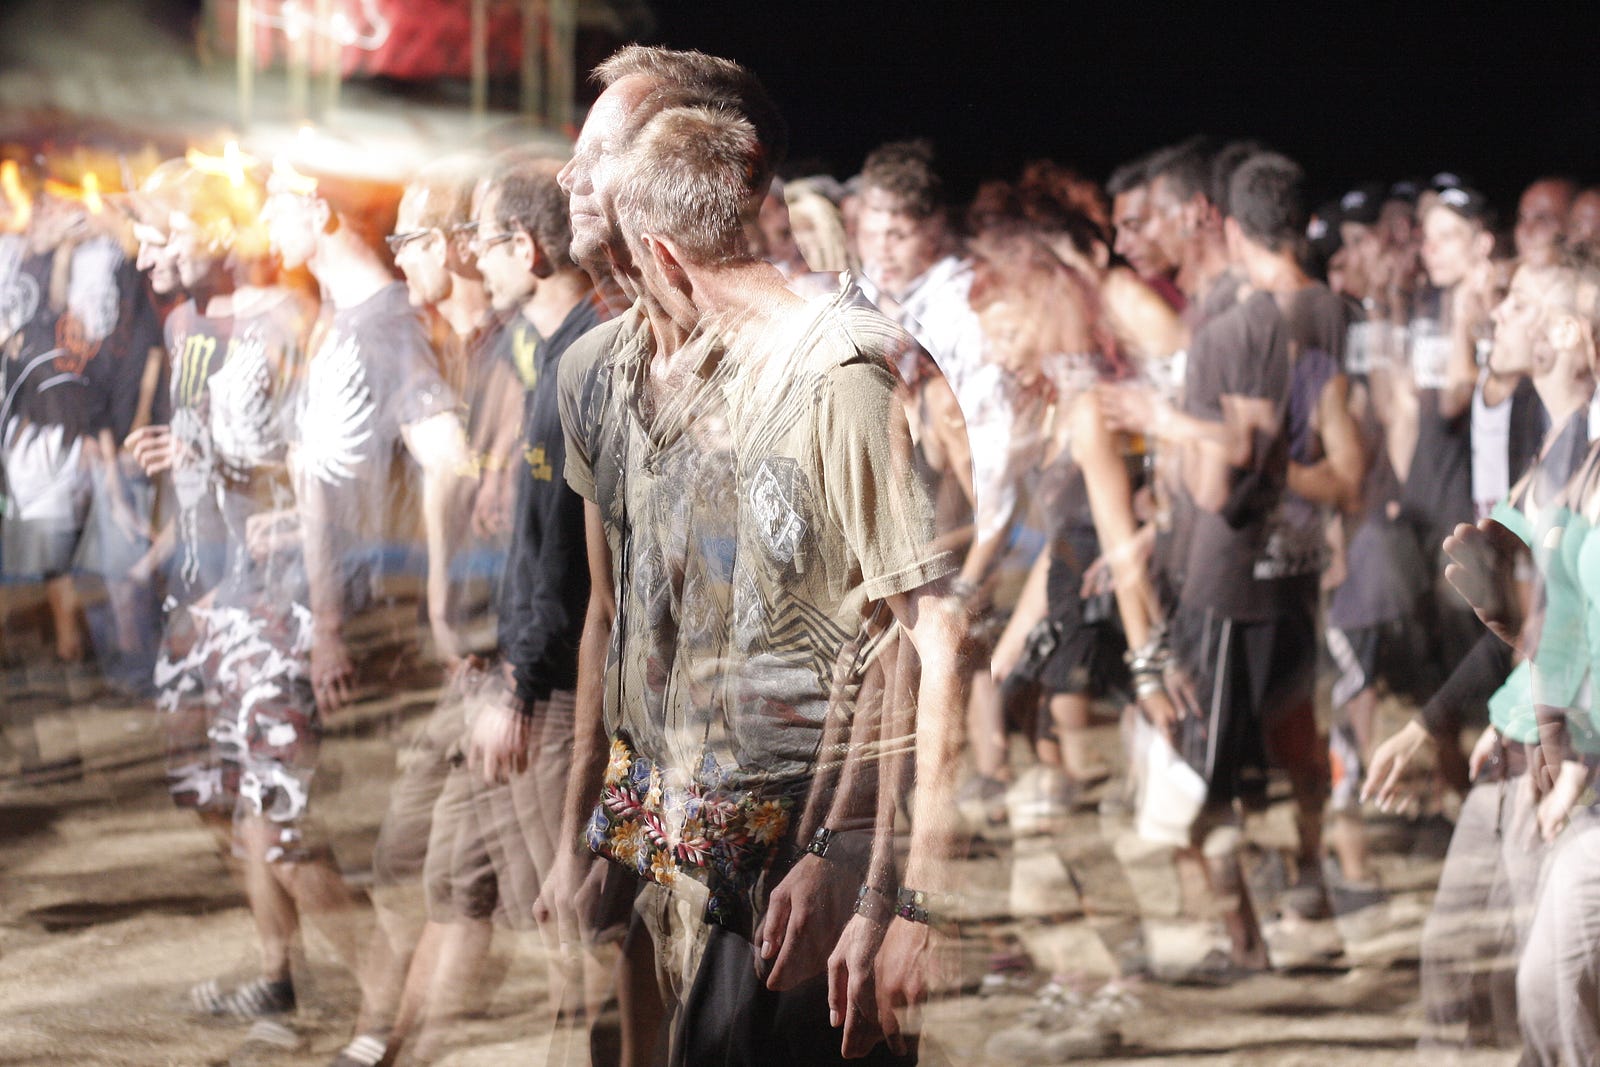 Dozens  young people walks to the left, blurred as though visualized while on a psychedelic drug like LSD or psilocybin. Hallucinogens can produce various effects, including visual distortions, time perception alterations, thought pattern changes, and intensified emotions.